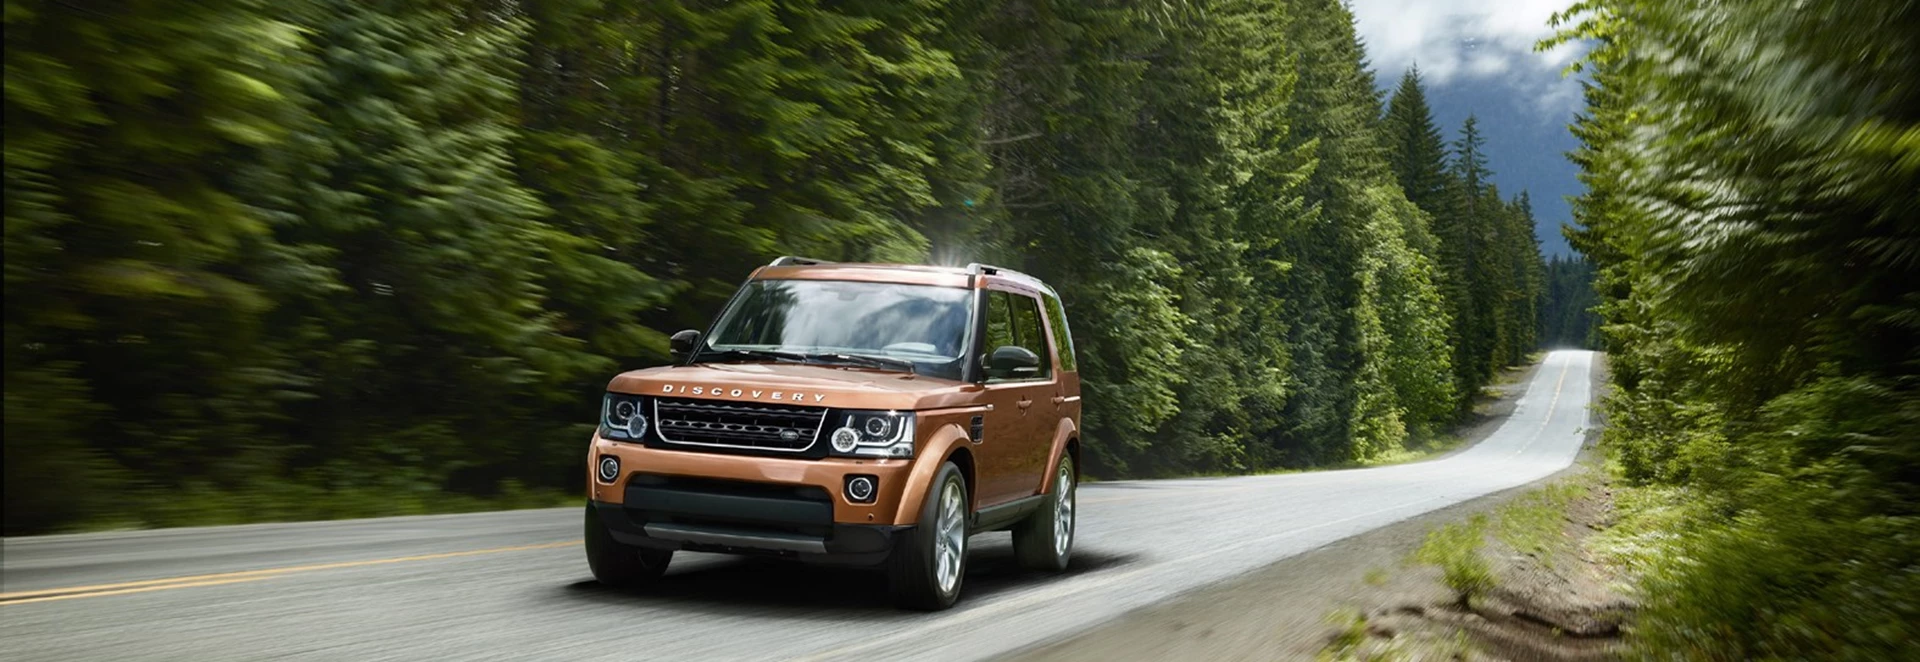 Land Rover Discovery Graphite and Landmark editions revealed